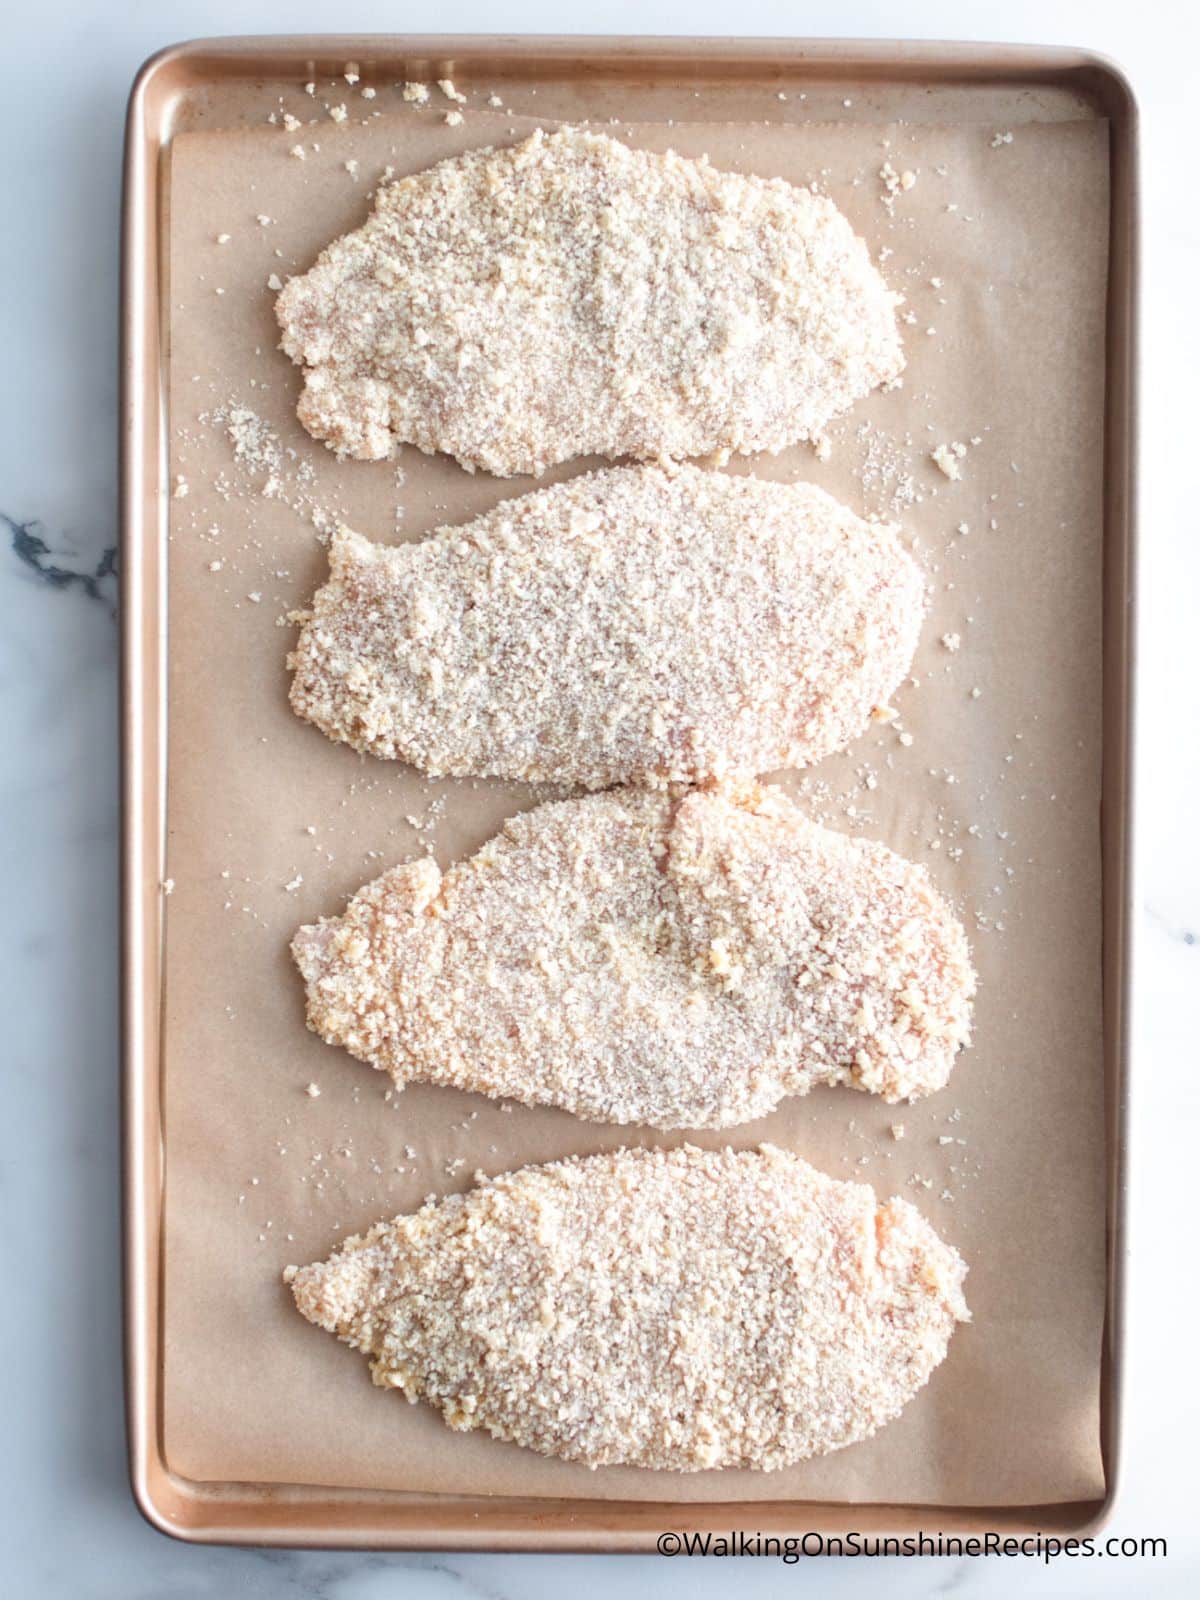 coated chicken cutlets on baking tray.